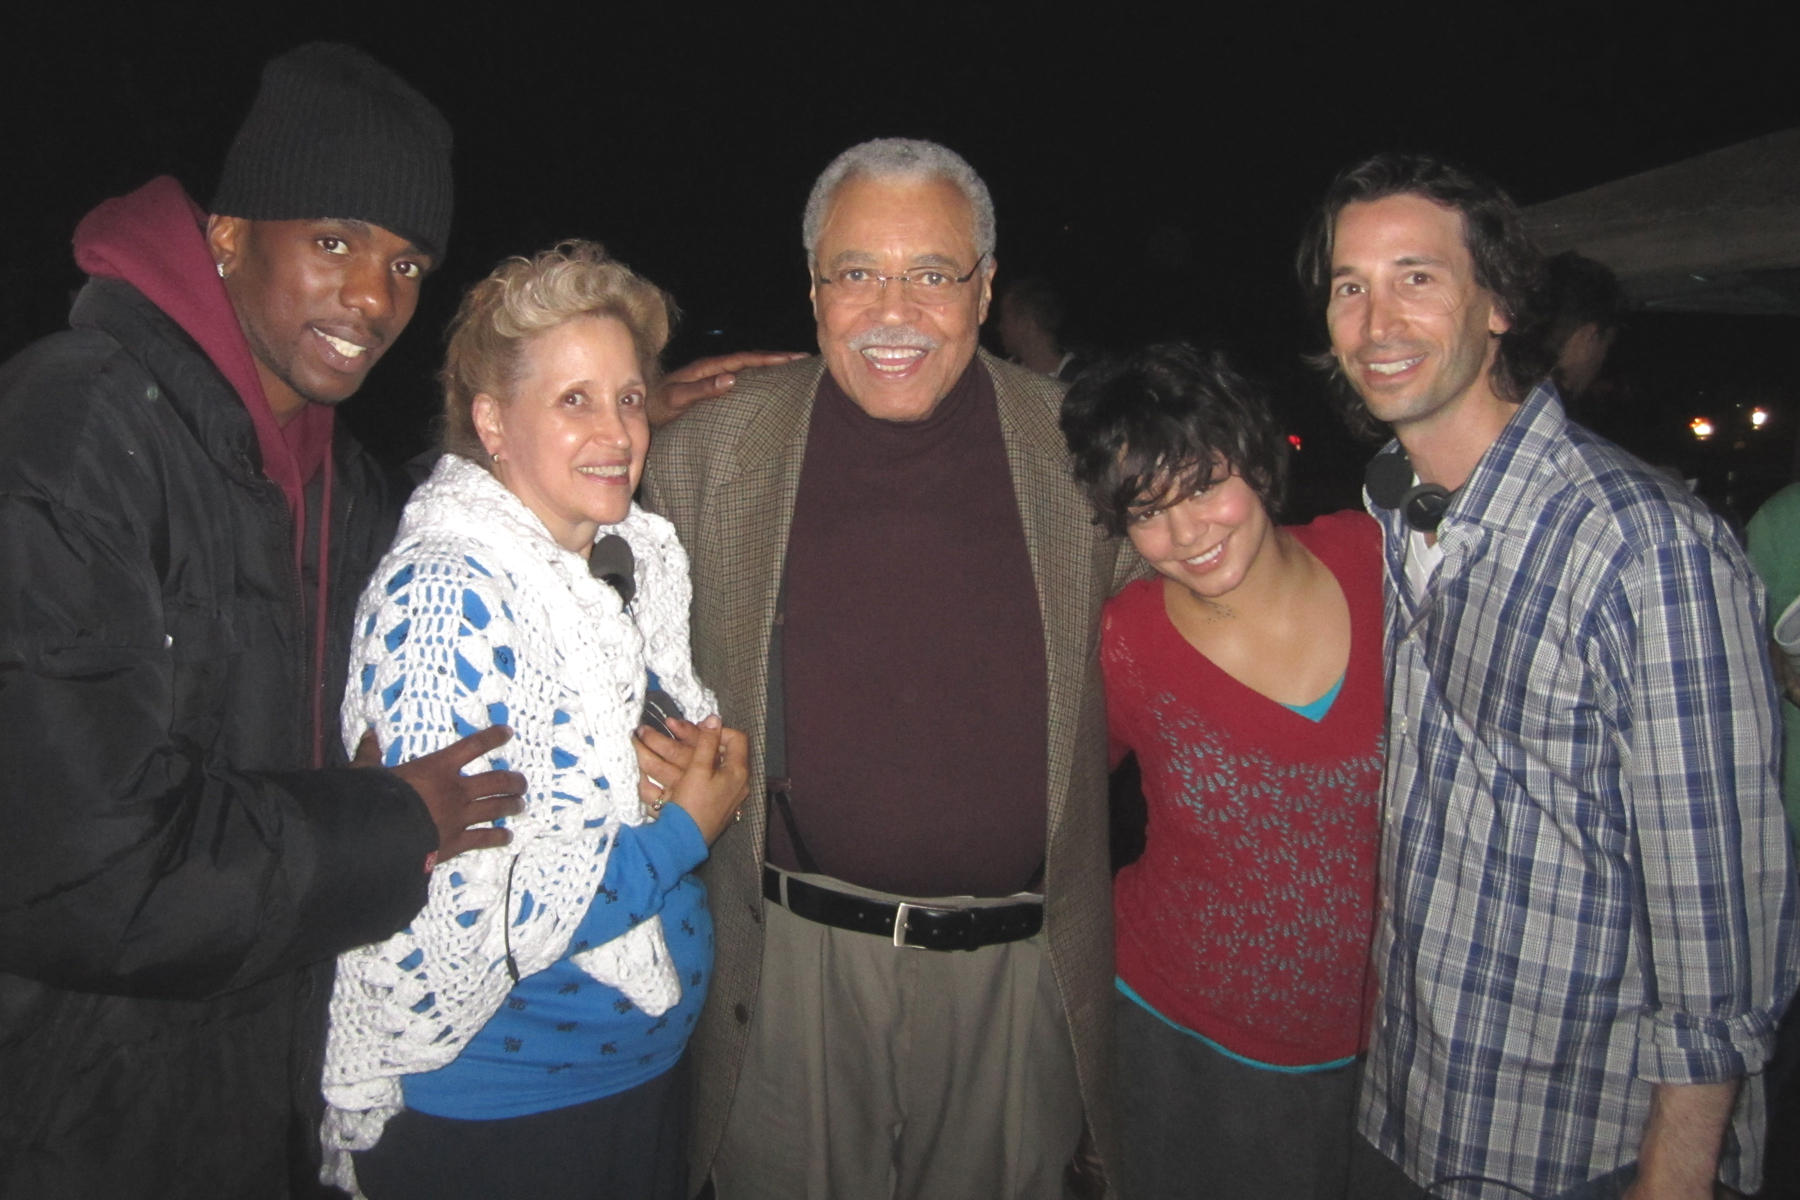 David, The Lovely Ms. Kathy, The Great Mr James Earl Jones, Beautiful Vanessa and The talent Director Mr. Ron Krauss..